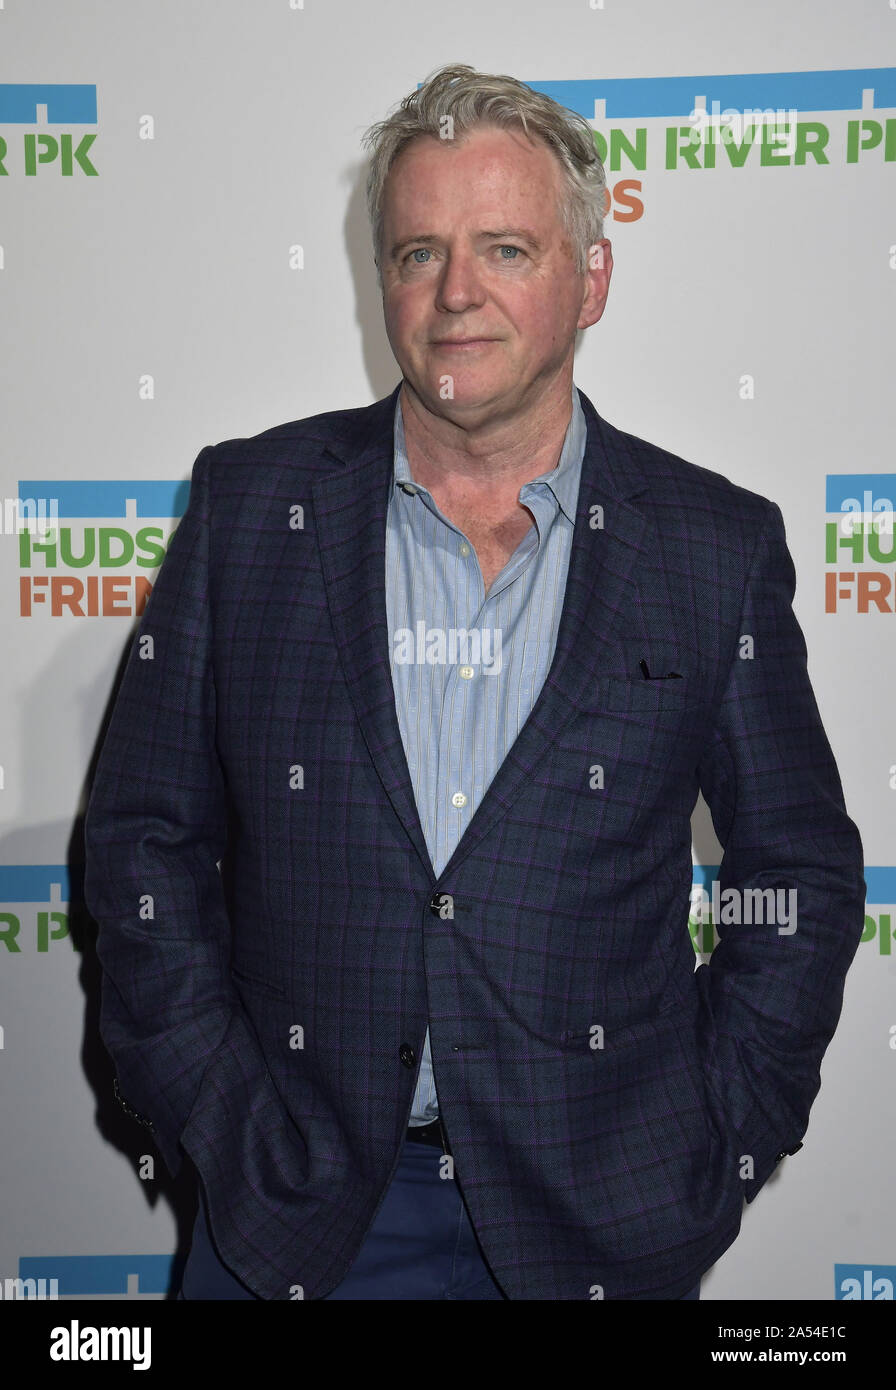 New York, United States. 17th Oct, 2019. Actor Aidan Quinn arrives on the red carpet Hudson River Park Annual Gala to honor Michael R. Bloomberg, David Chang and Lucy Liu at Cipriani South Street in New York City on Thursday, October 17, 2019. Photo by Louis Lanzano/UPI Credit: UPI/Alamy Live News Stock Photo